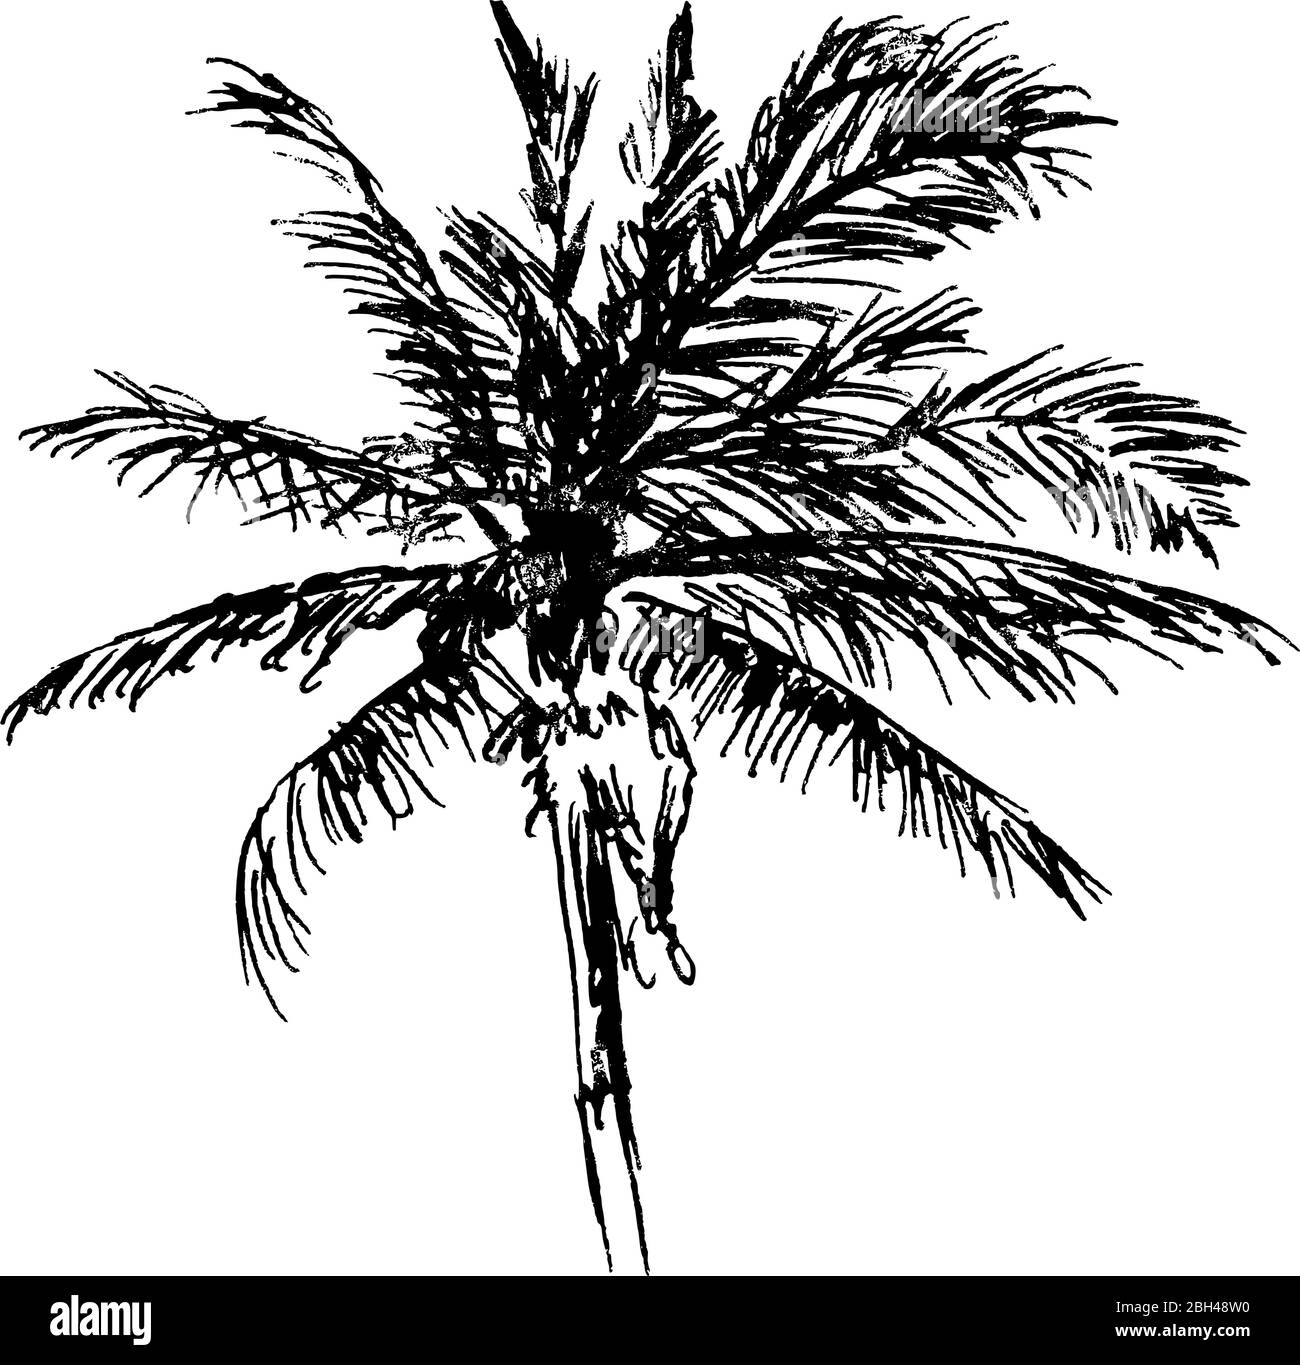 Coconut Tree Drawing High Resolution Stock Photography and Images - Alamy